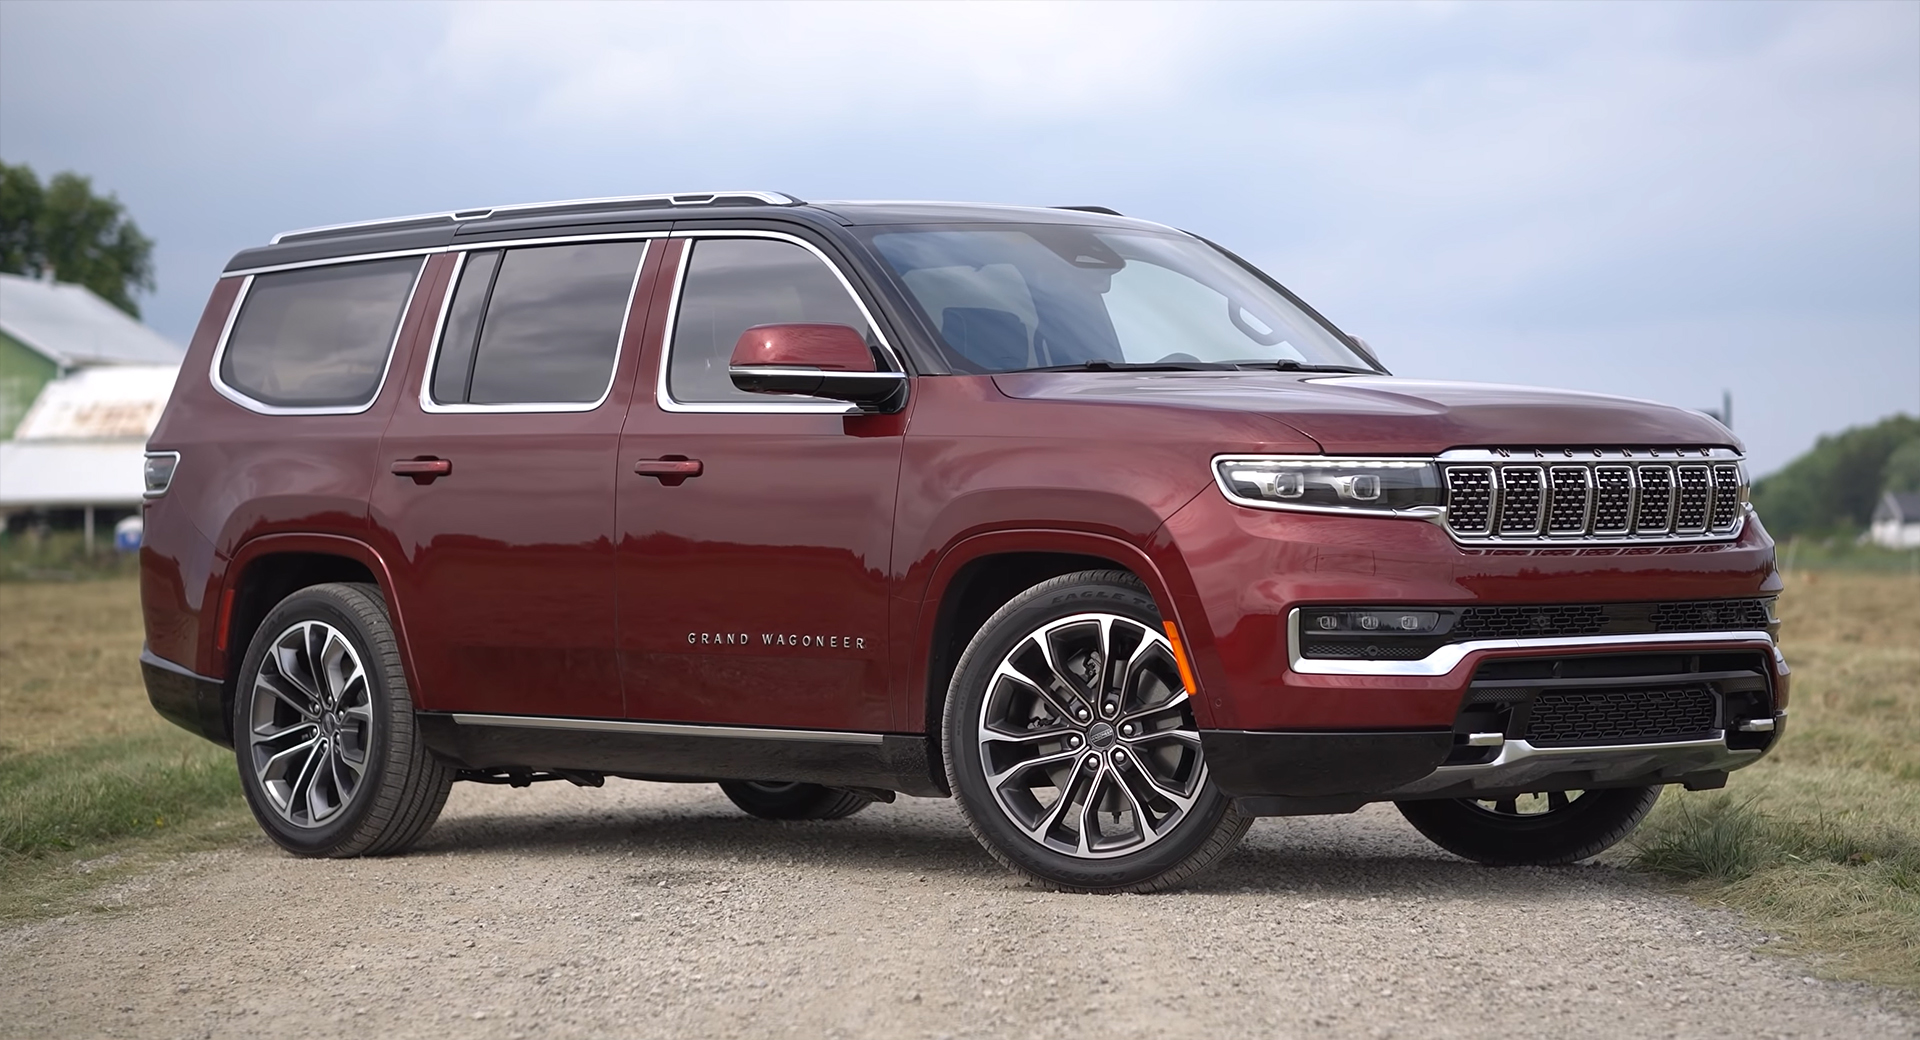 2022 Jeep Wagoneer And Grand Wagoneer Reviews Are Here, And They Look